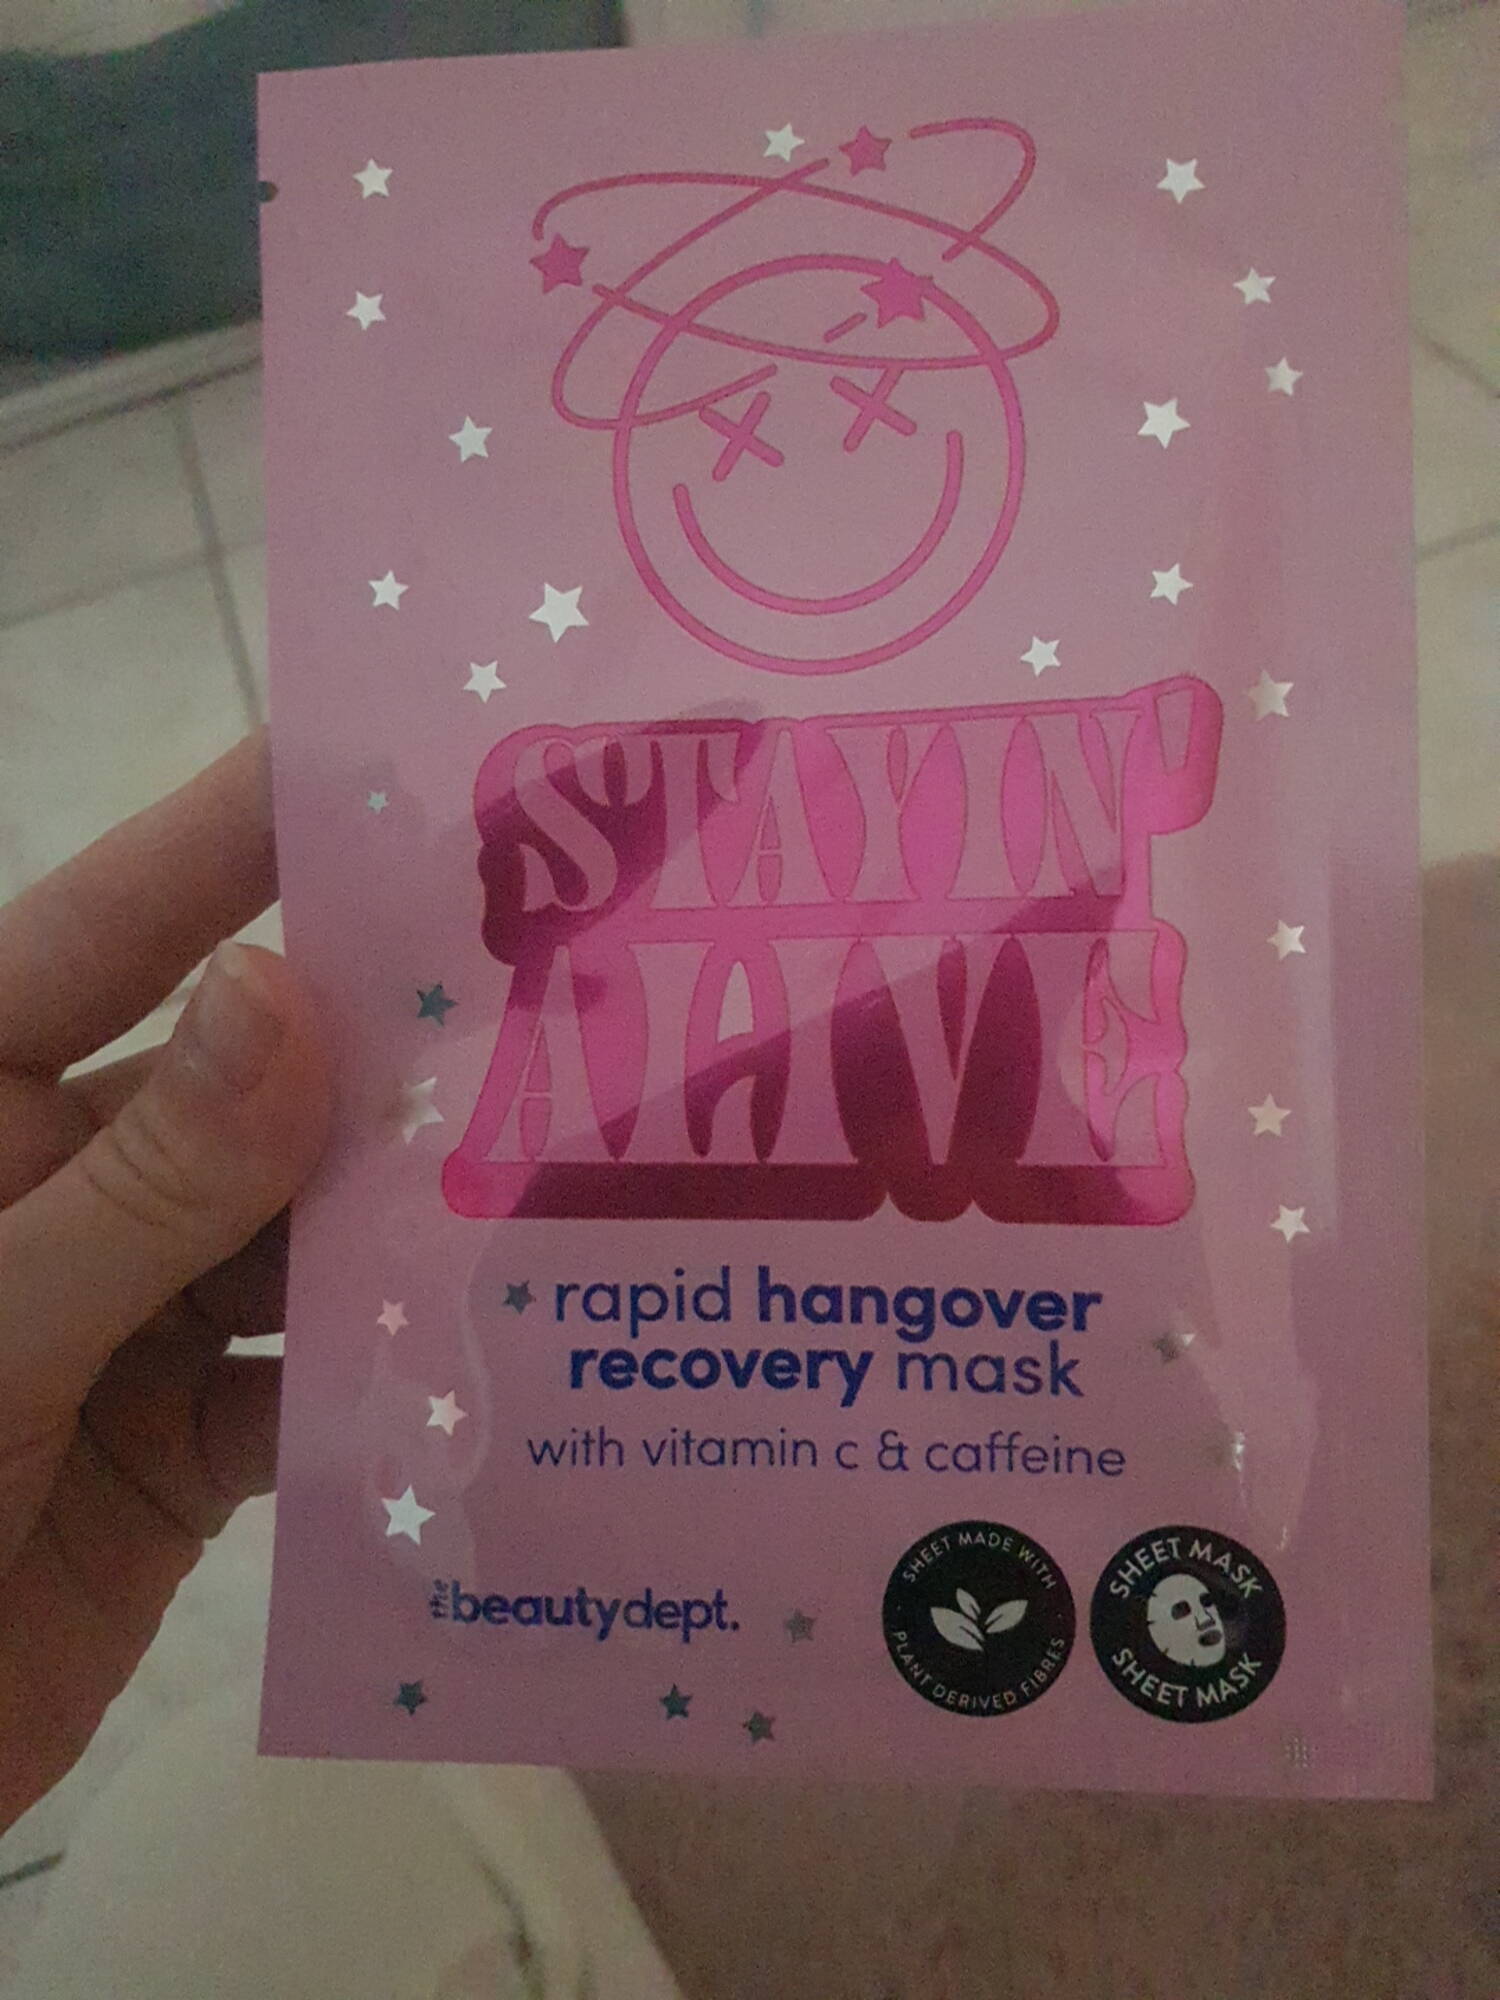 THE BEAUTY DEPT - Stayin' Alive - Rapid hangover recovery mask